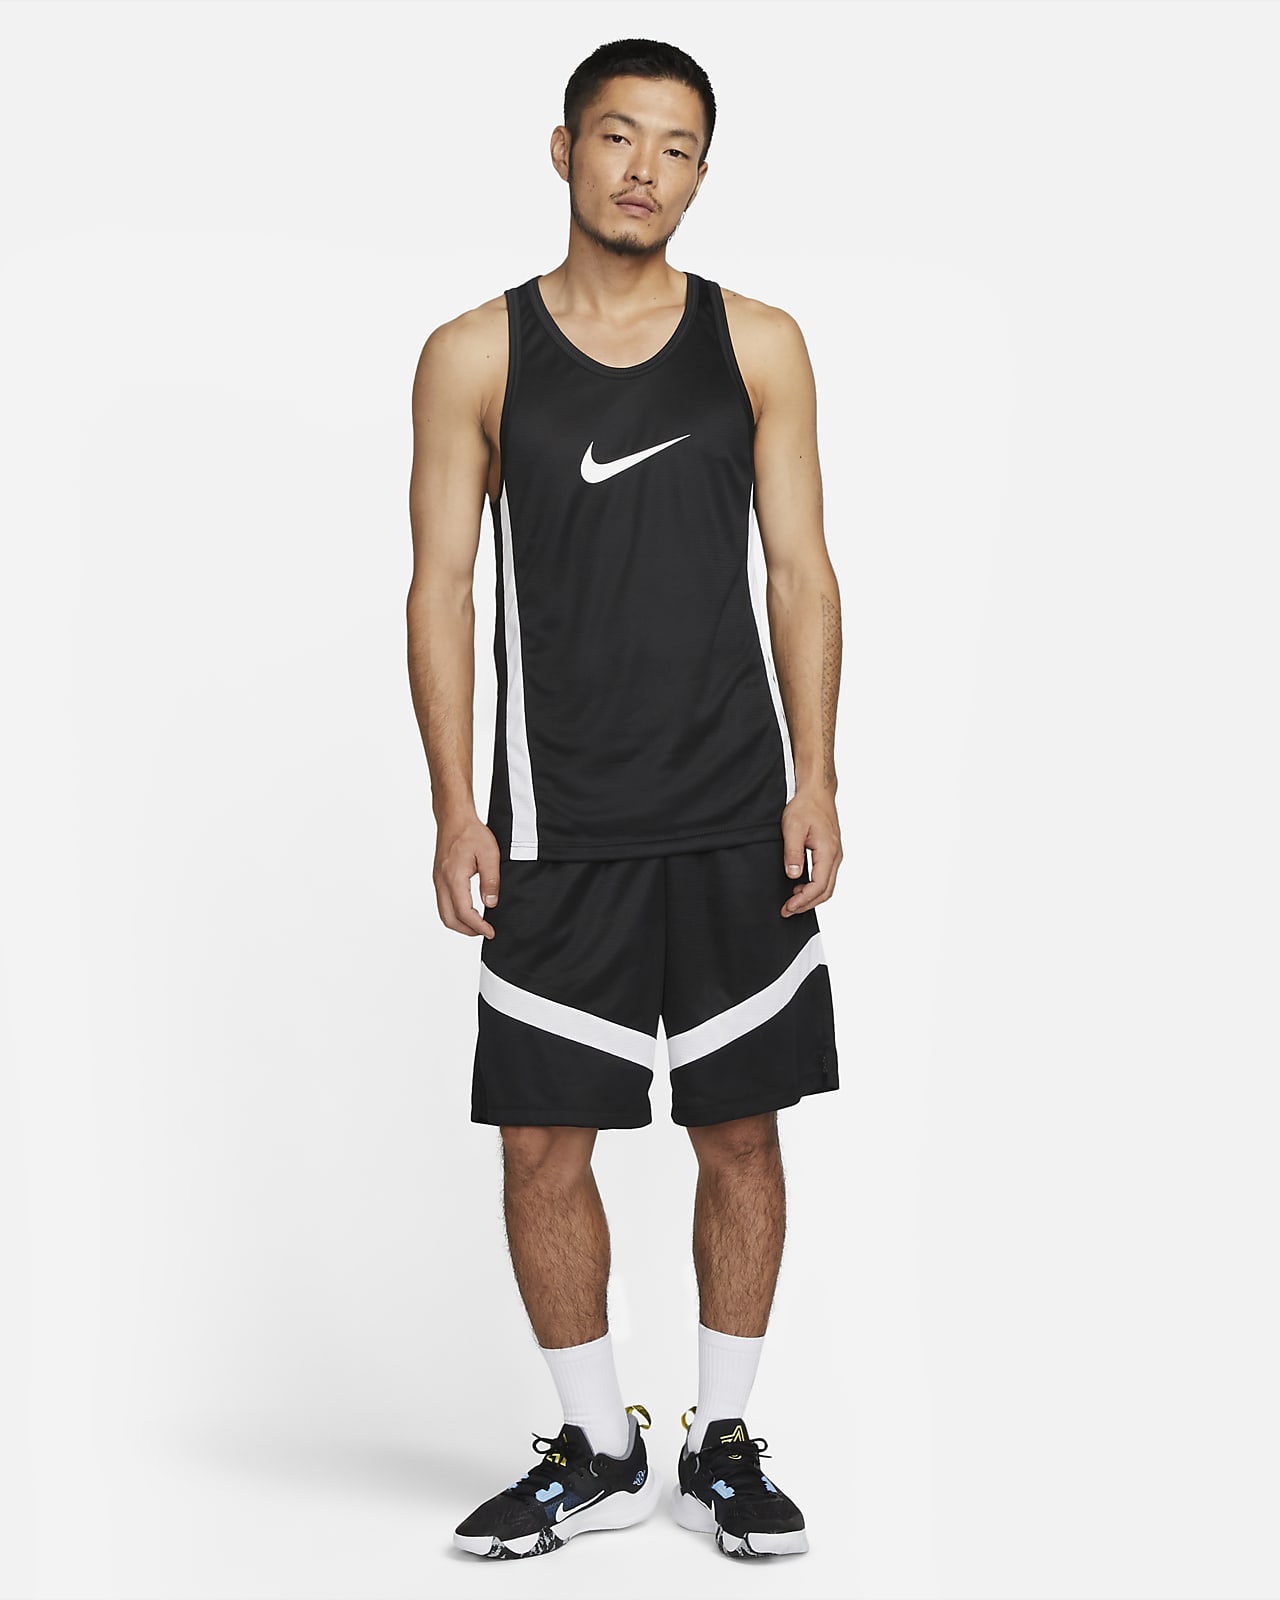 Nike Icon Dri-fit Basketball Jersey in Black for Men